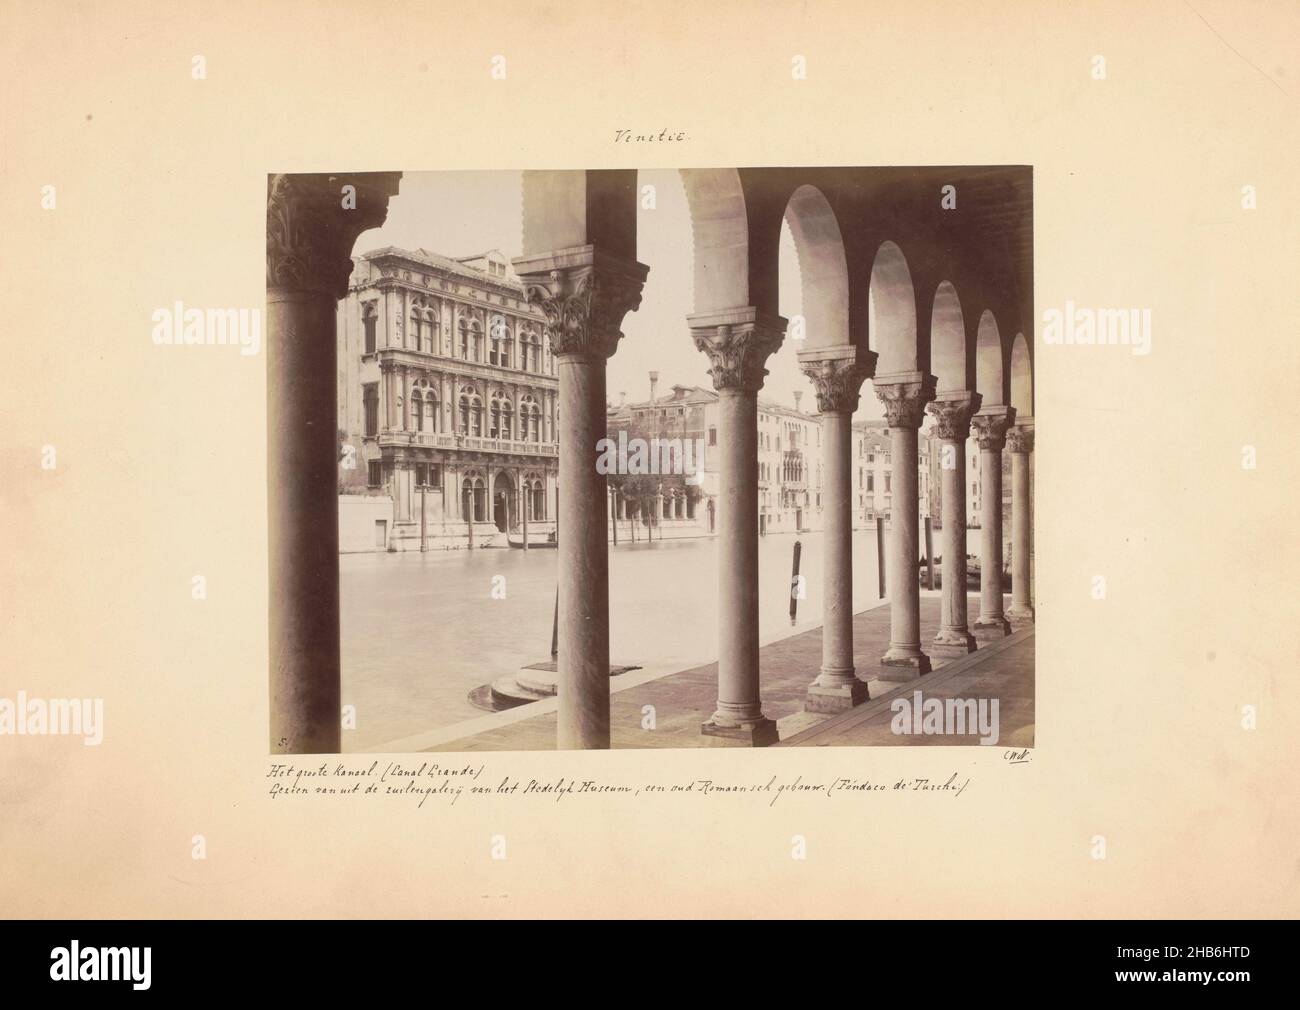 View of the Grand Canal from the colonnade of Fondaco dei Turchi at Venice, Venice. The Grand Canal. ( Canal Grande.) Seen from the colonnade of the Municipal Museum, an ancient Romanesque building. (Fóndaco de'Turchi.). (title on object), anonymous, Venice, c. 1875 - c. 1900, cardboard, albumen print, height 183 mm × width 241 mm Stock Photo